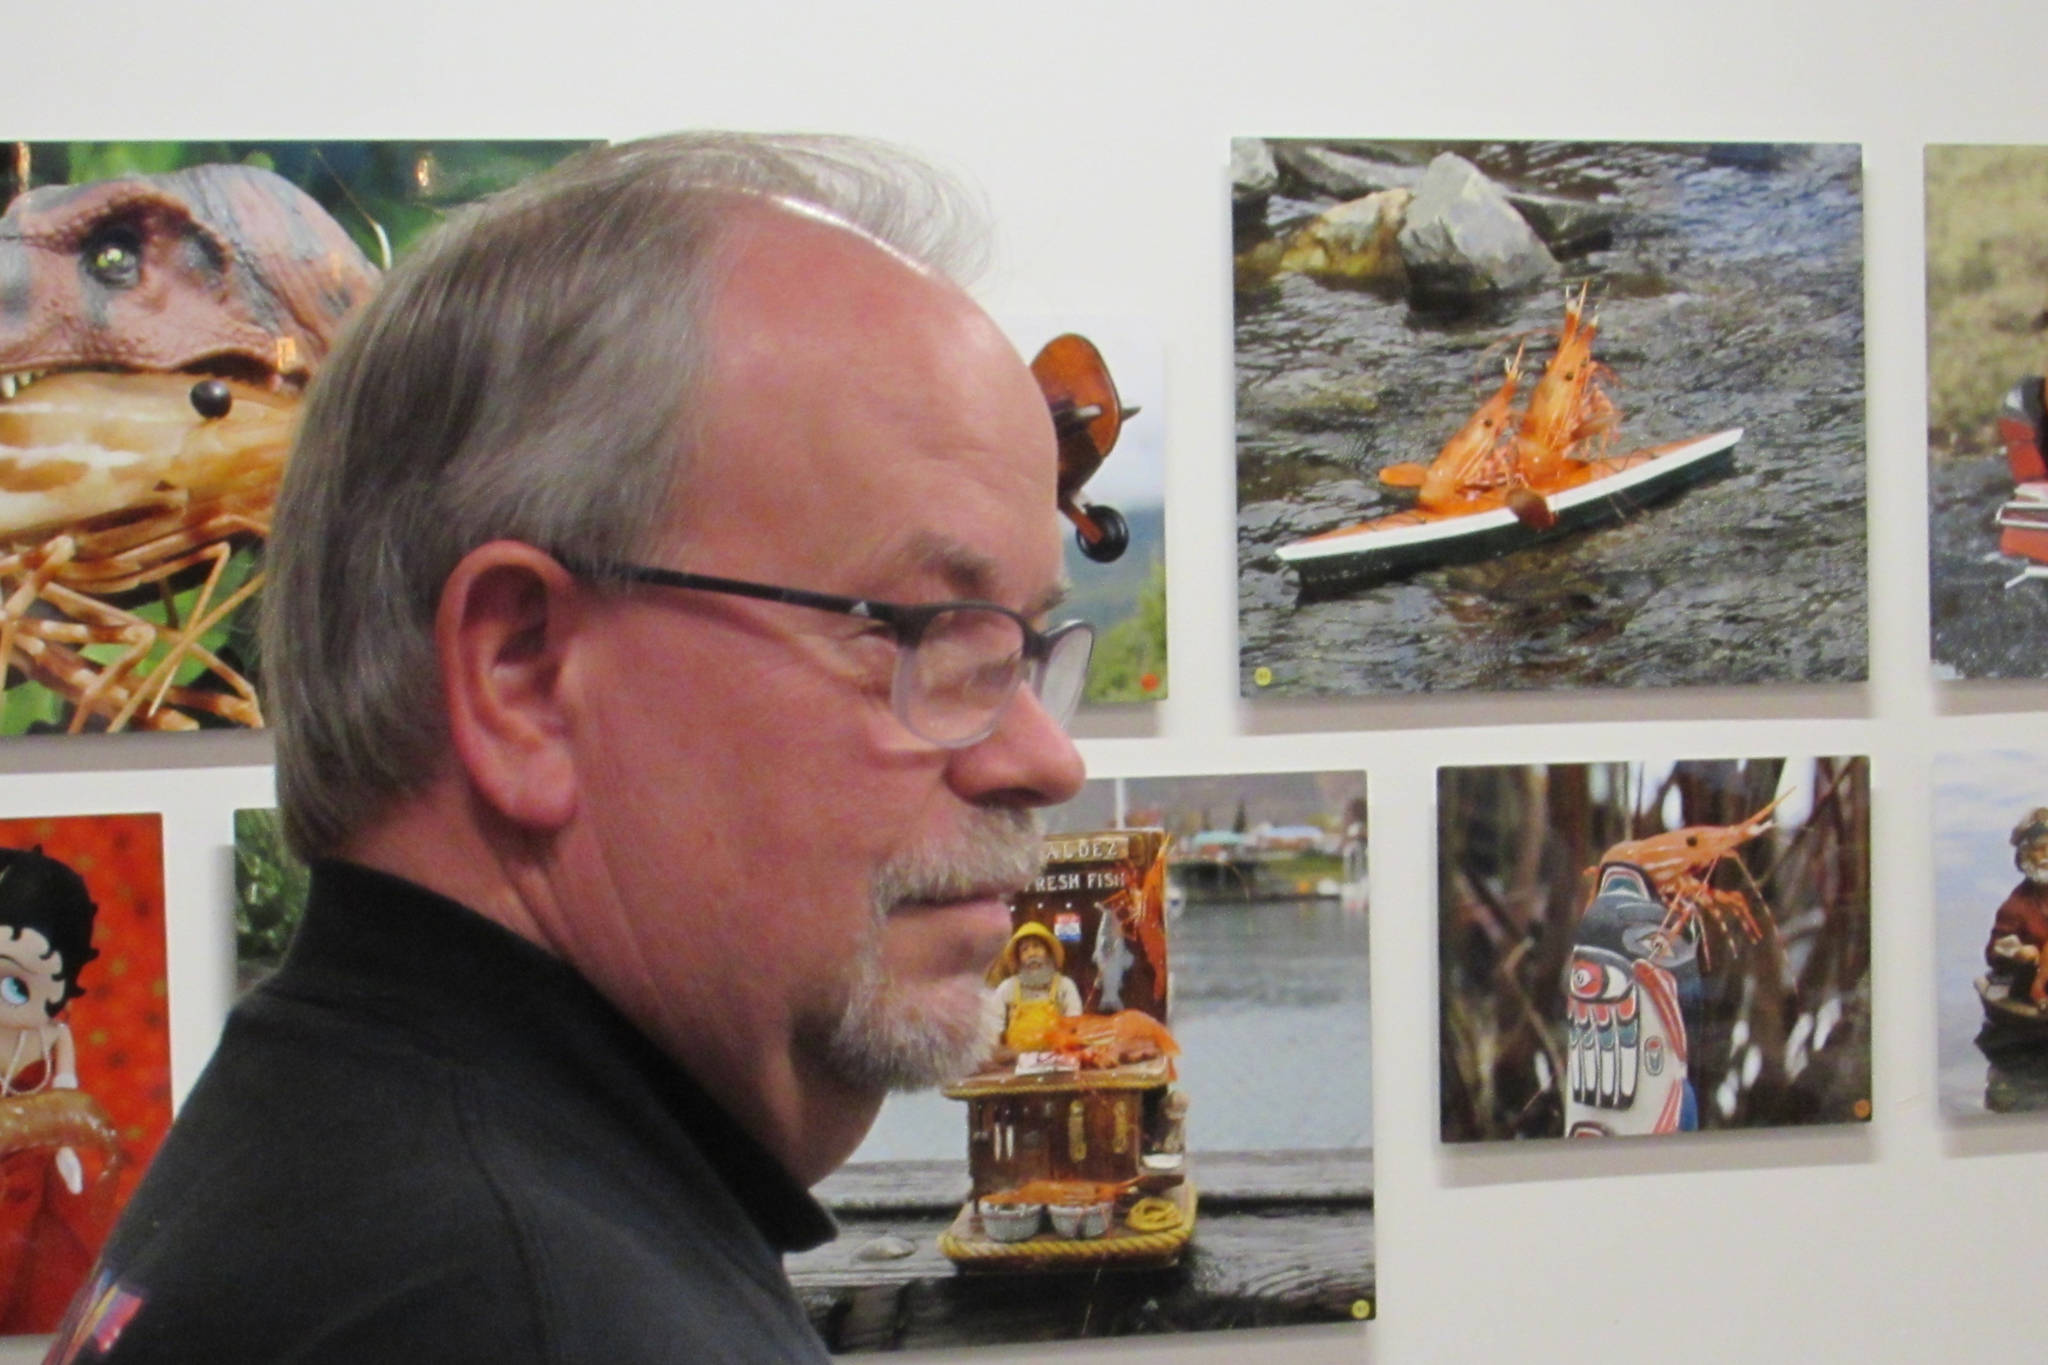 Al Laudert didn’t use Photoshop or any other editing software to create the photos displayed behind him. The Shrimp Whisperer of Valdez instead carefully plans photos before catching shrimp and posing them for his pictures. (Ben Hohenstatt | Capital City Weekly)